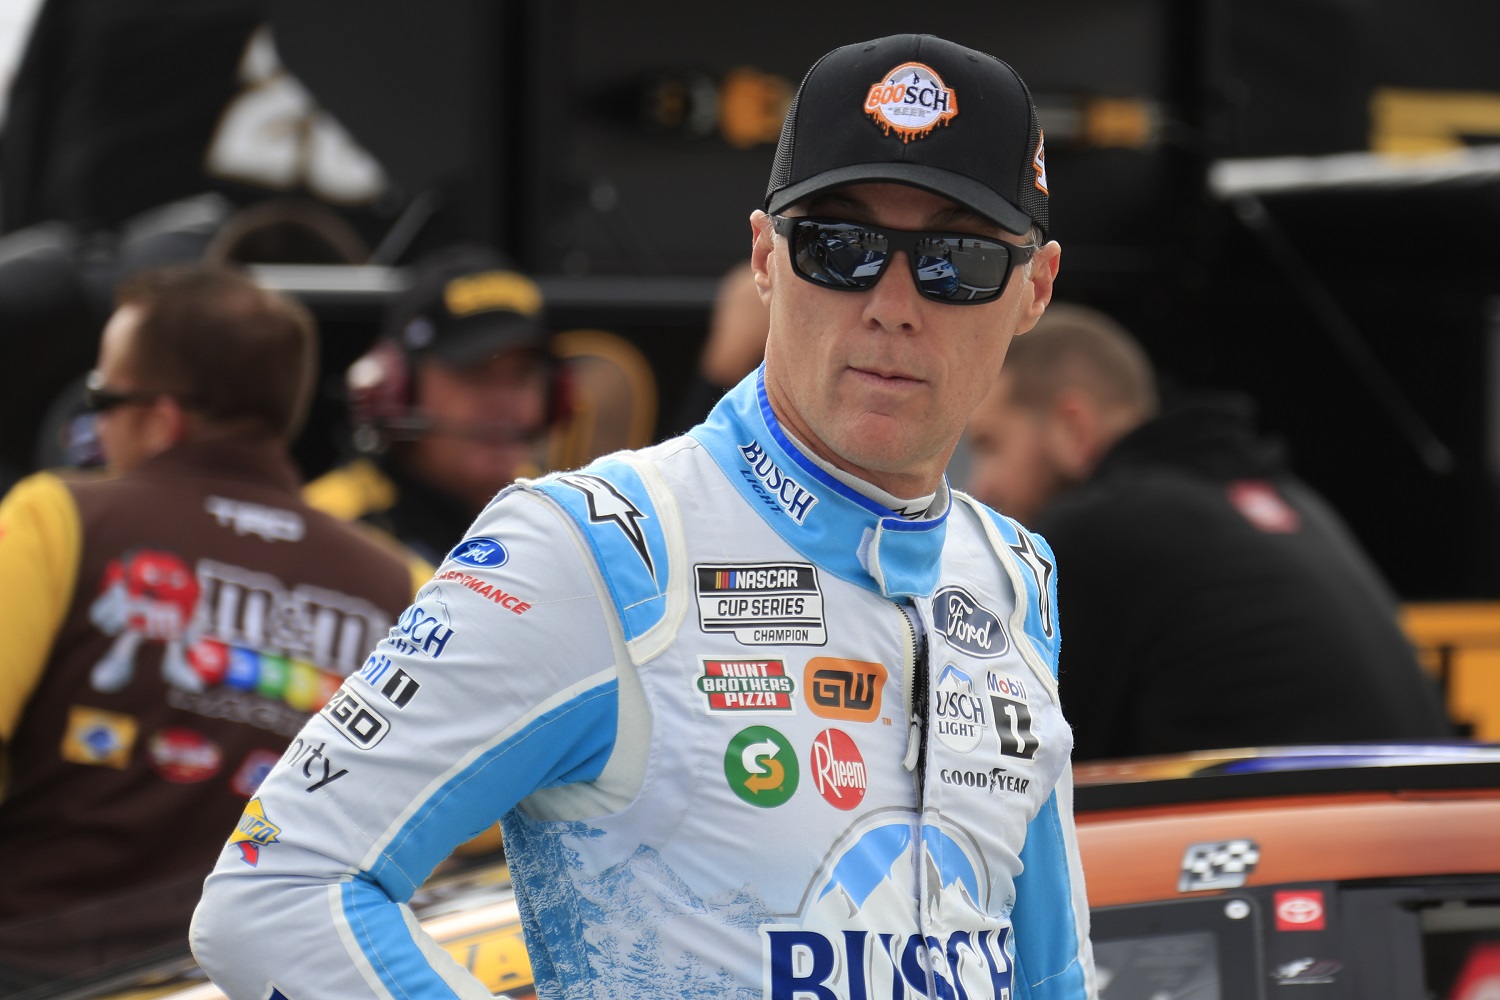 Kevin Harvick looks on during qualifying for the NASCAR Cup Series Xfinity 500 on Oct. 29, 2022 at Martinsville Speedway. | Jeff Robinson/Icon Sportswire via Getty Images